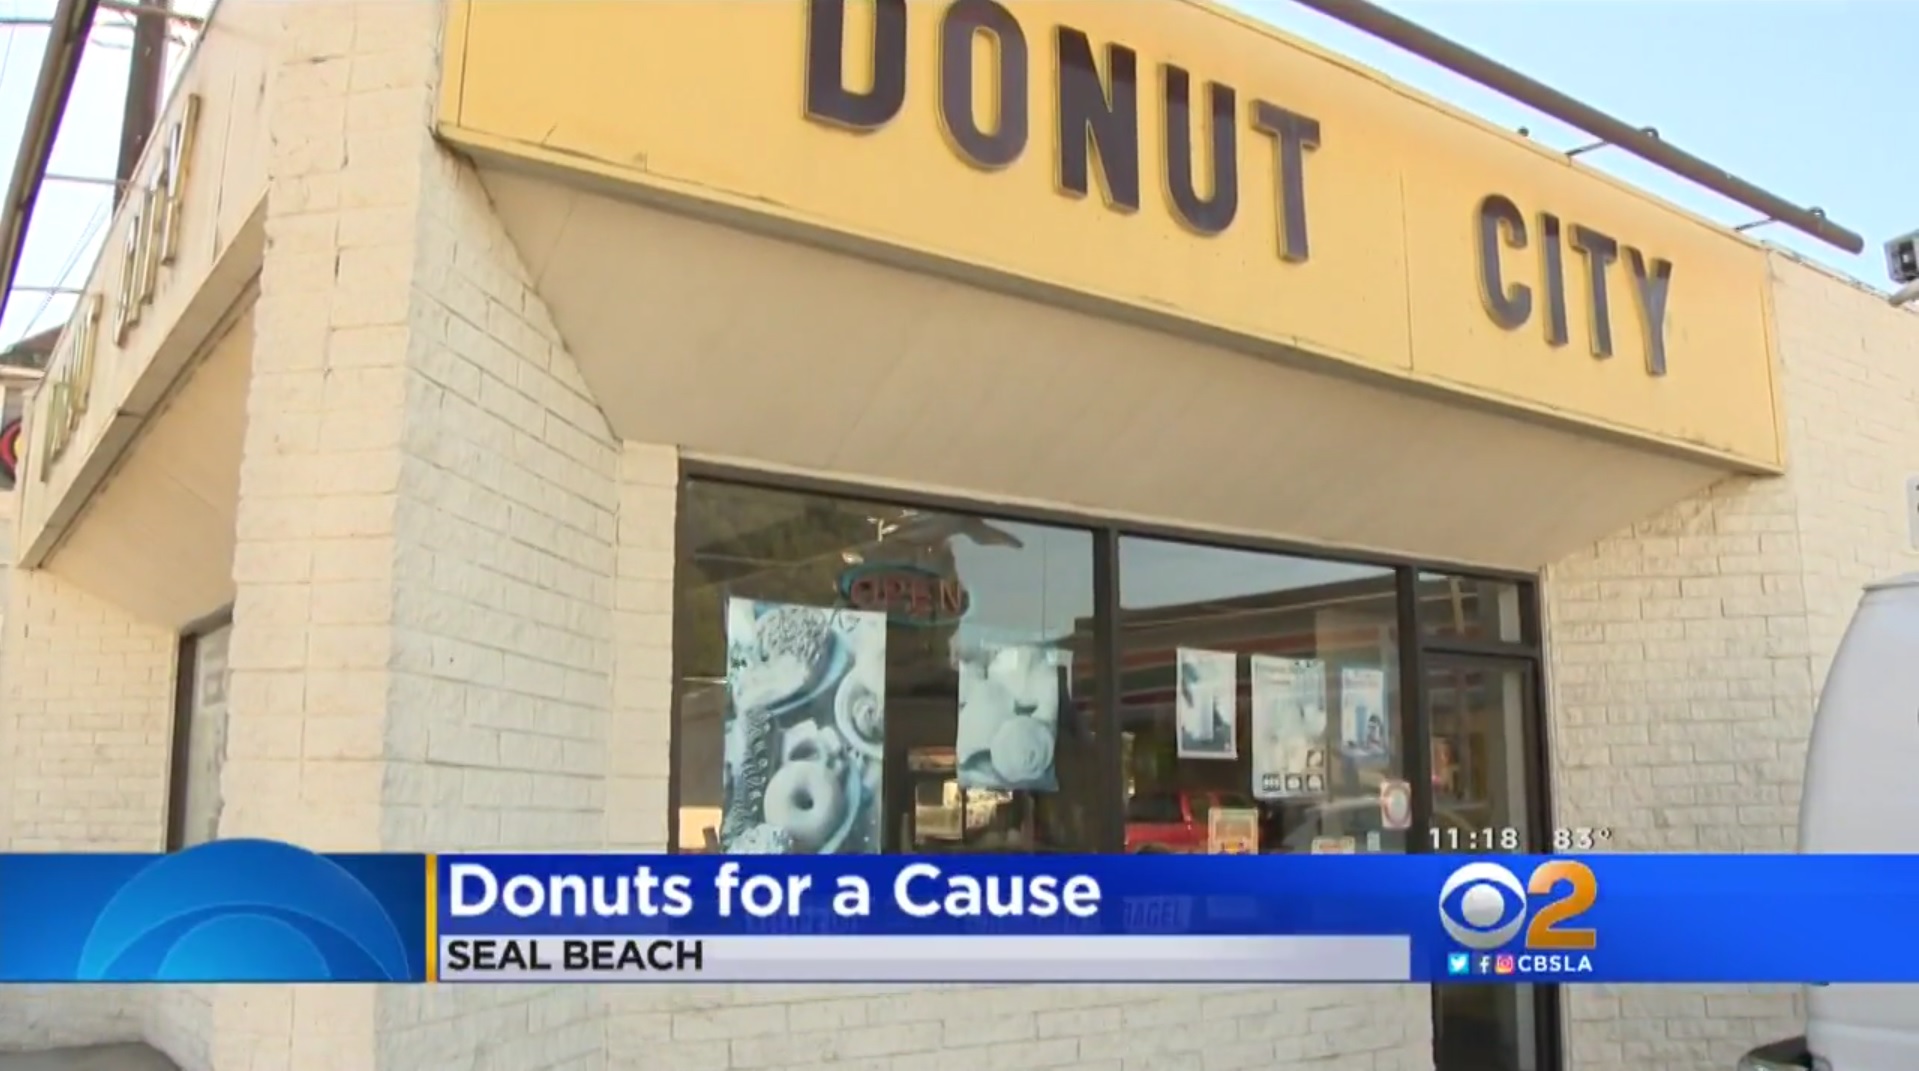 Donuts for a Cause